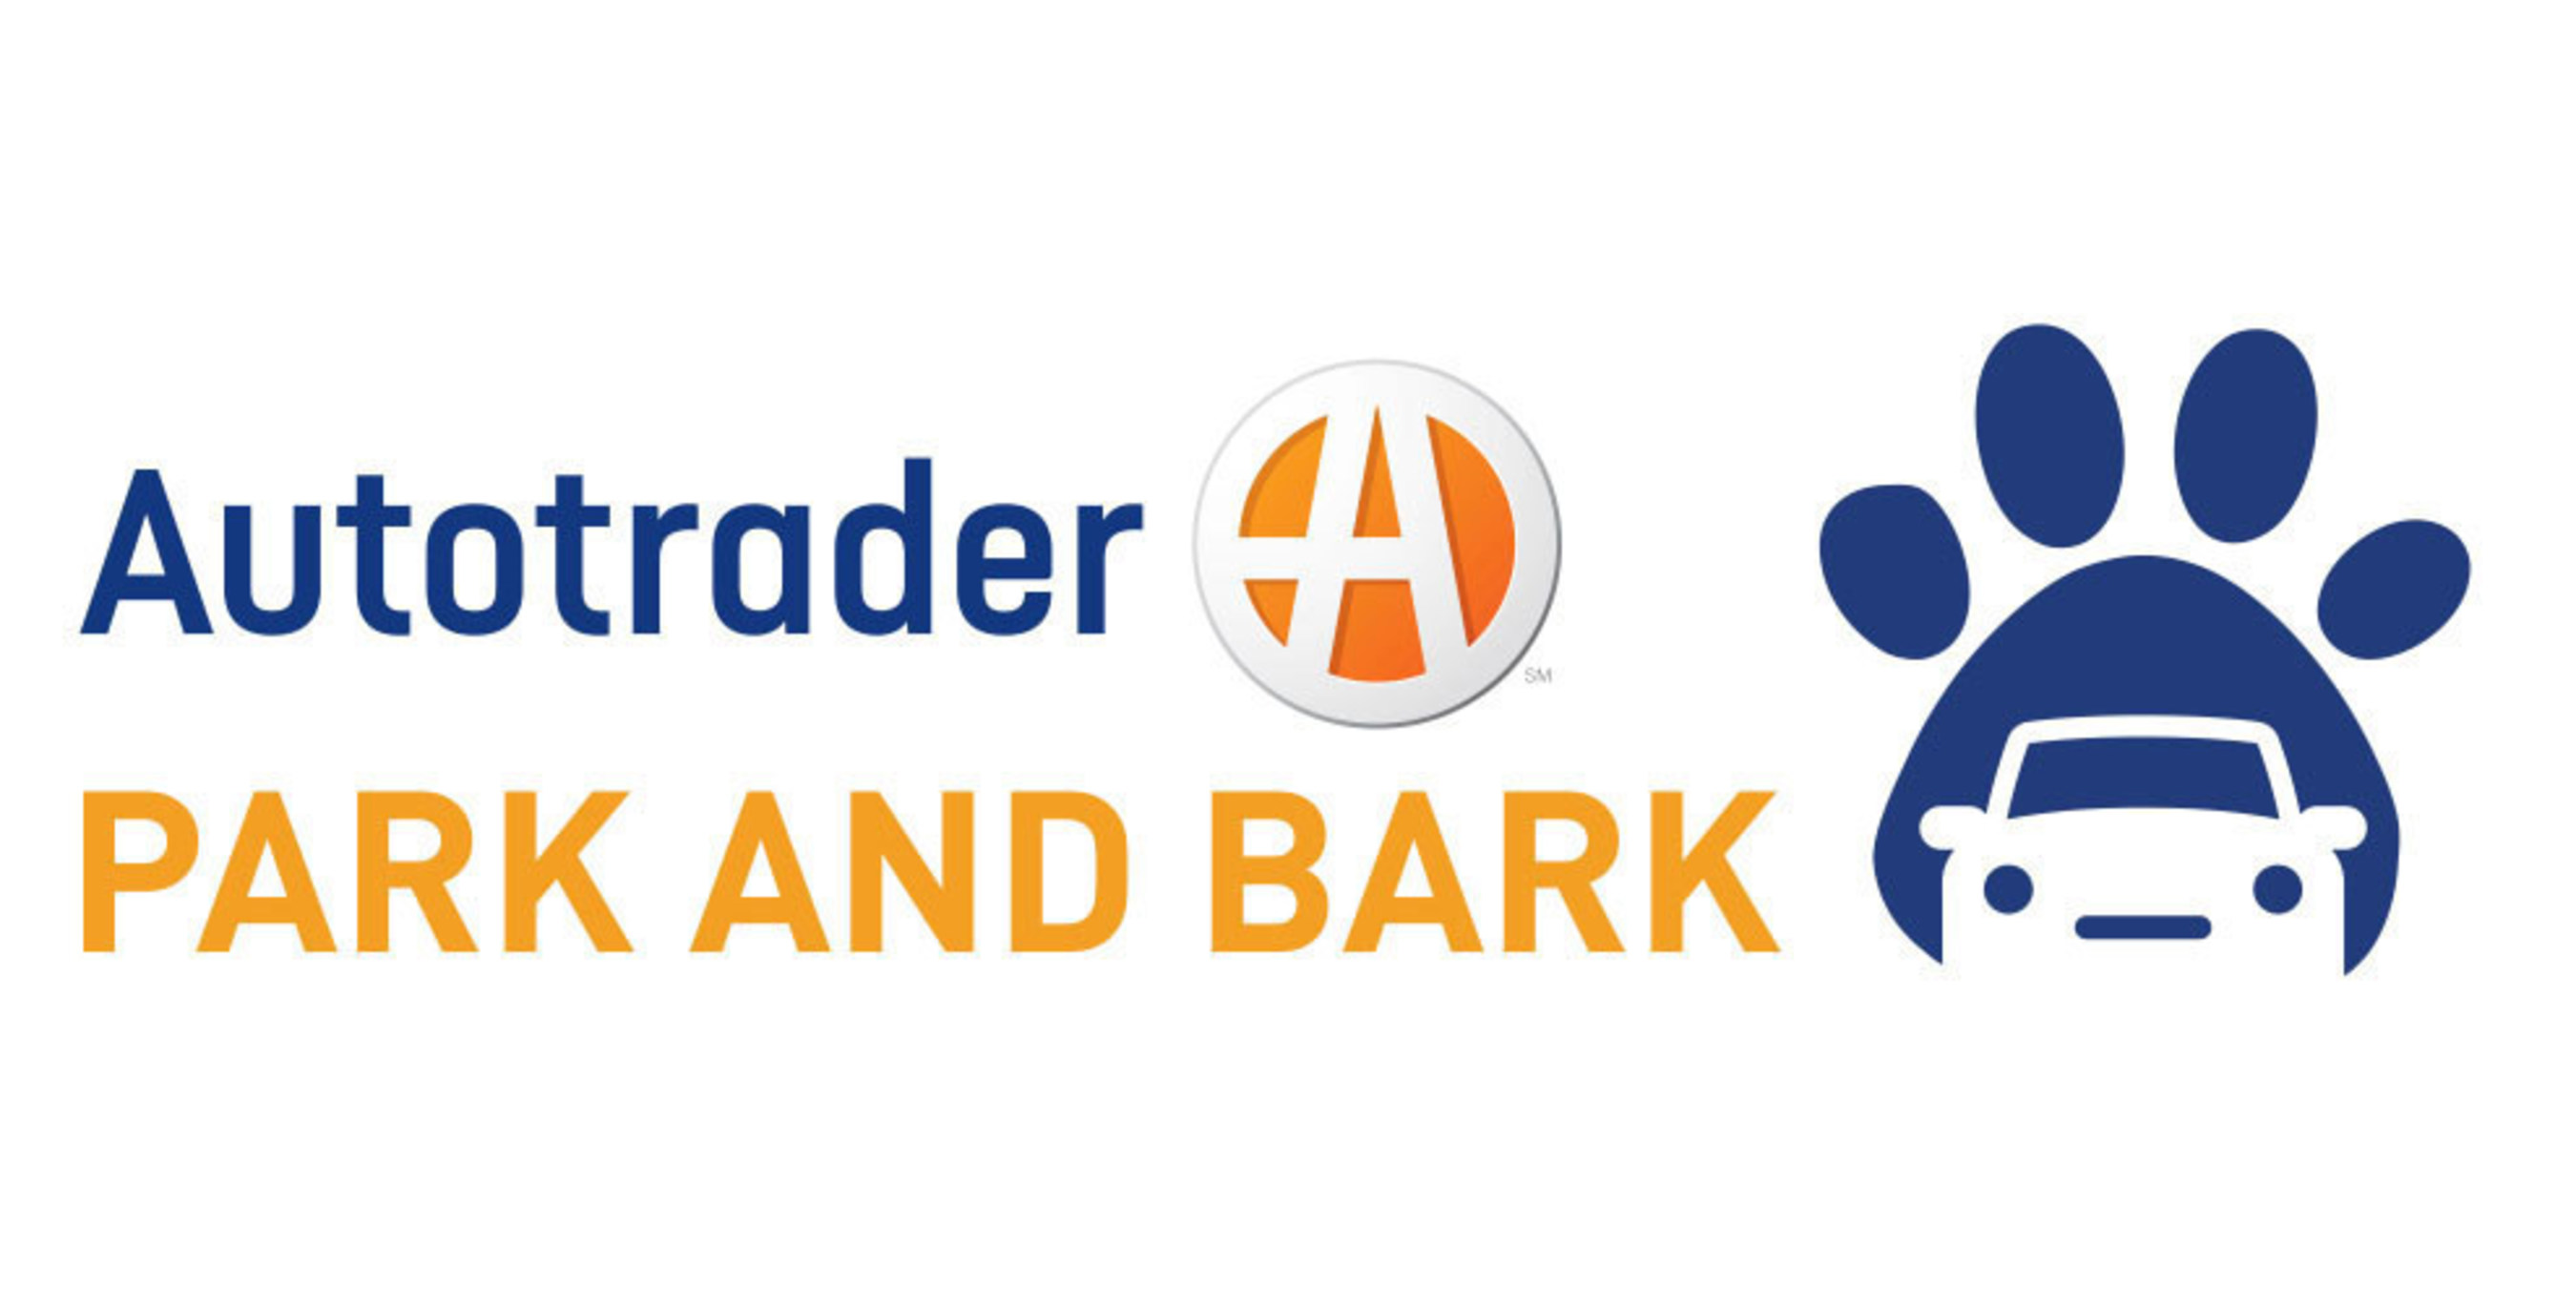 Paws and Celebrate National Dog Day with Autotrader in Atlanta at 'Park and Bark' Event August 26